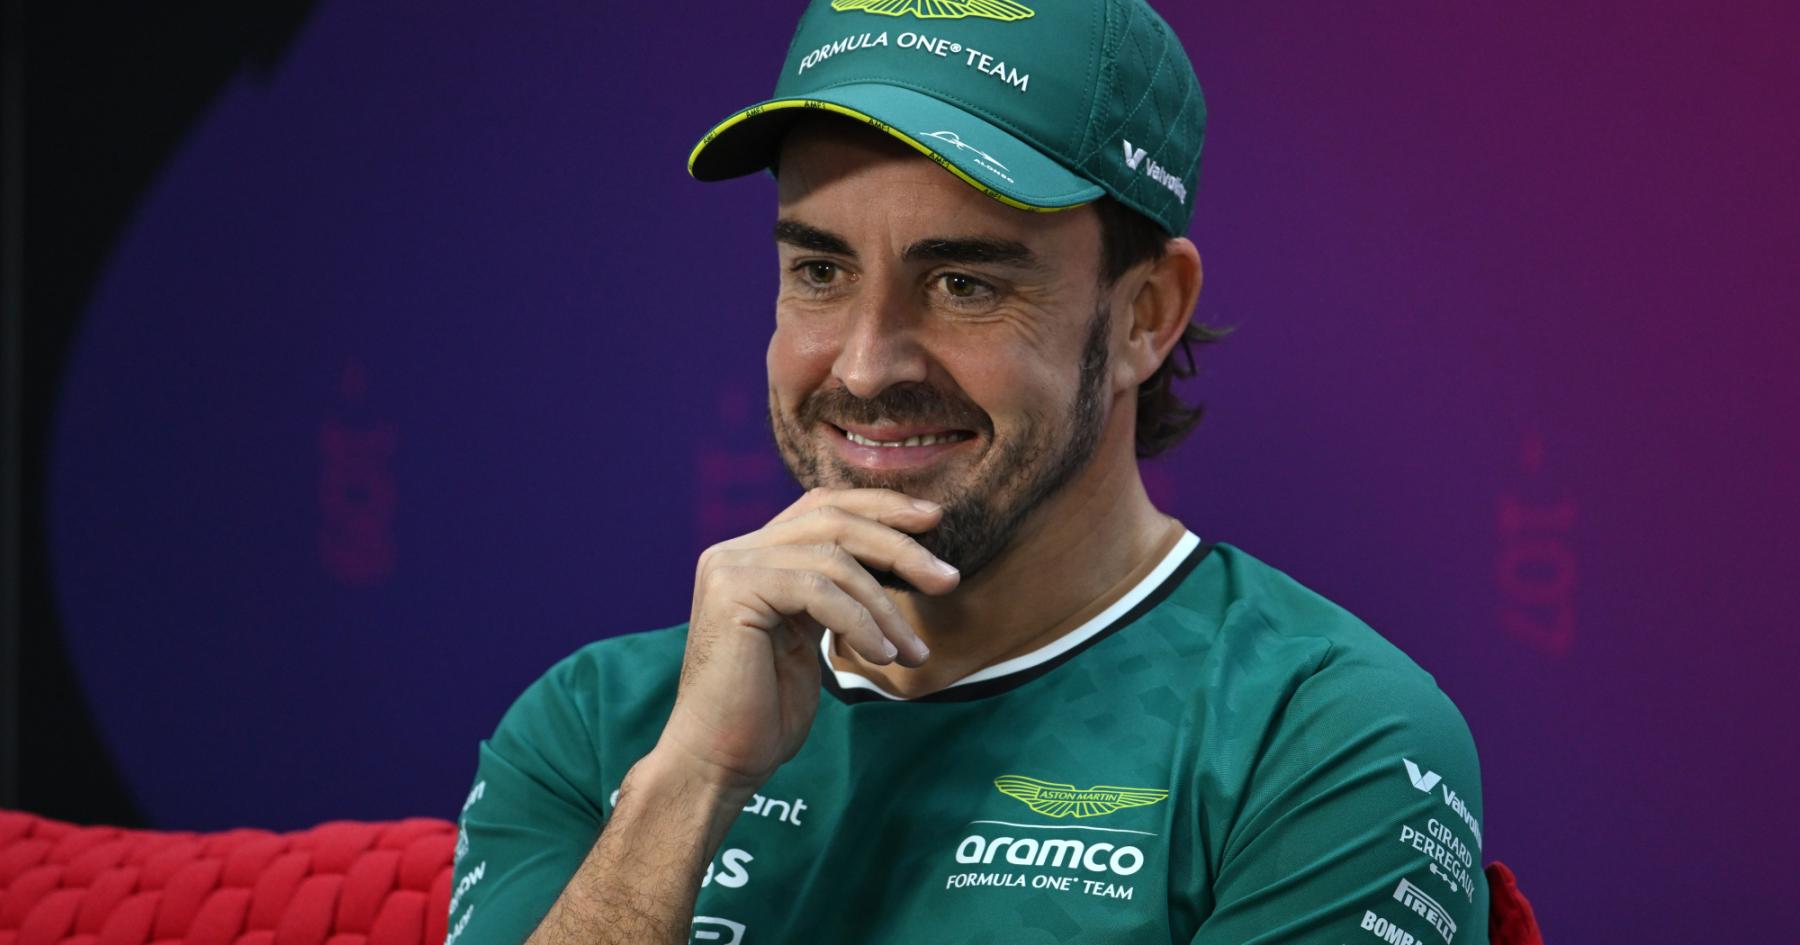 Exciting News: Alonso's Return and Hamilton's Possible Replacement - A Racing Update